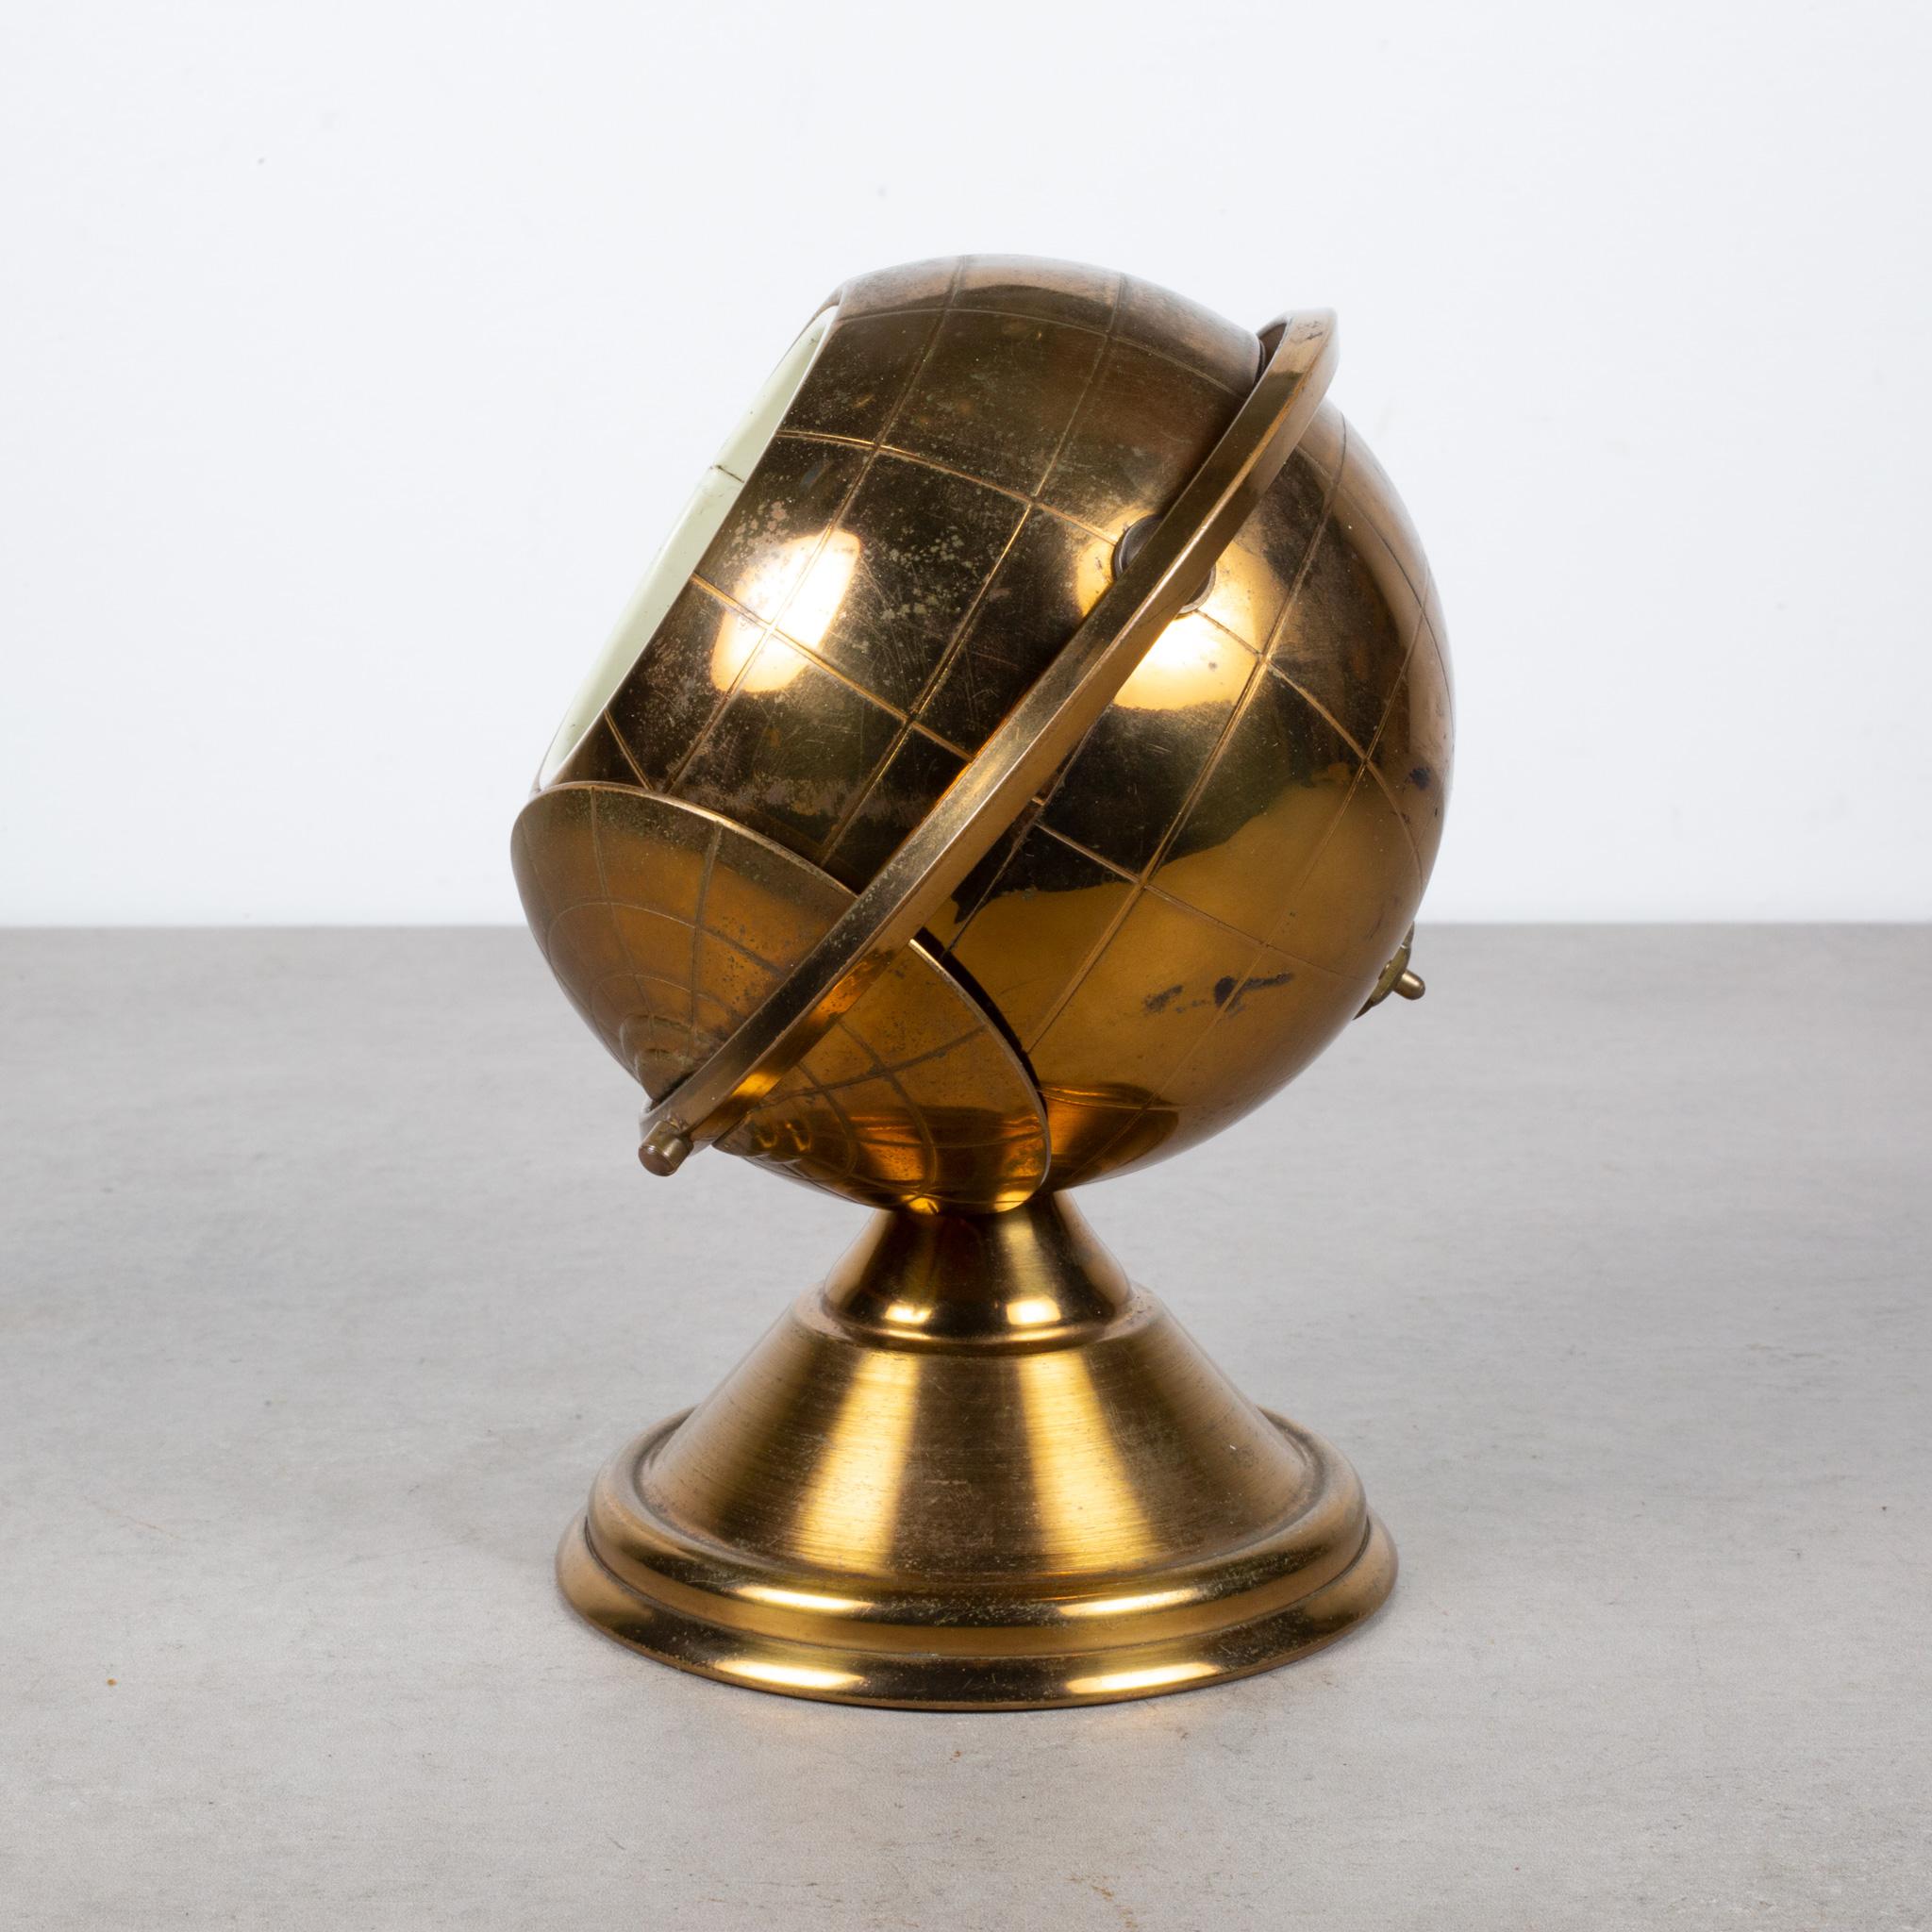 ABOUT

This is an original midcentury brass cigarette holder. The lid slides open on the globe's axis to reveal a metal interior designed to hold cigarettes. This globe is unique because it has a leather nameplate on the bottom. This piece has